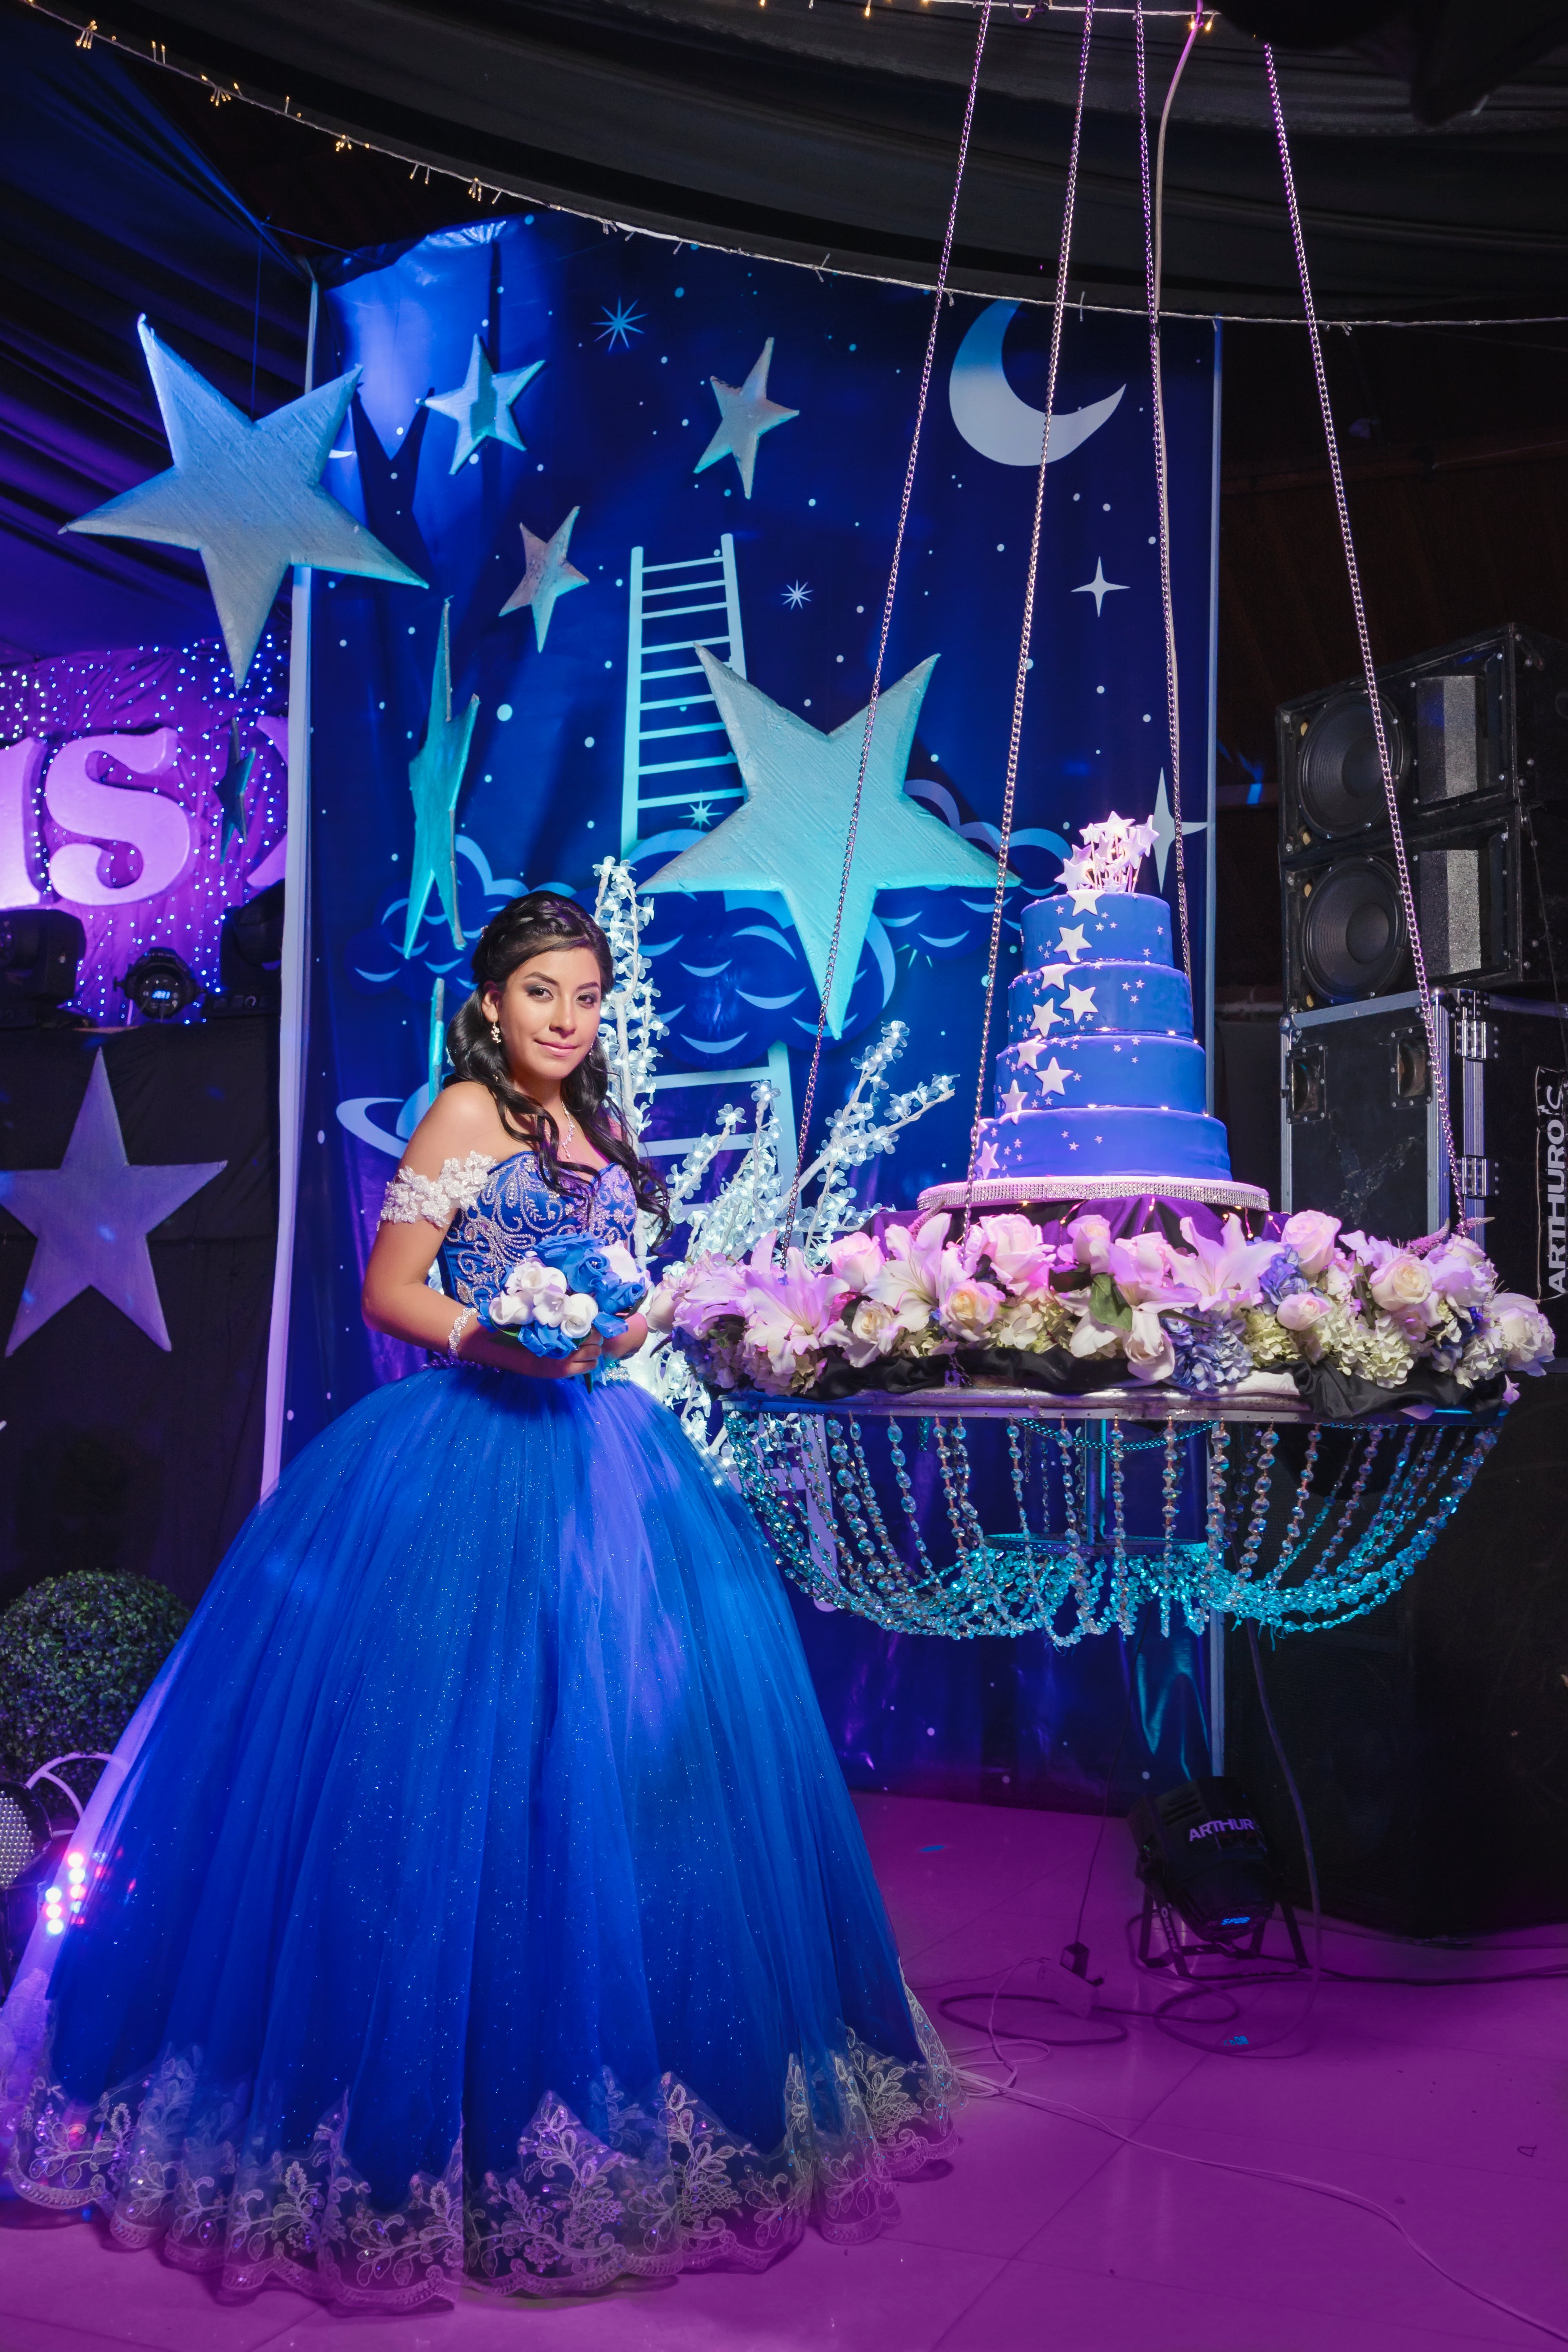 A young woman at a Quinceanera | Source: Pexels